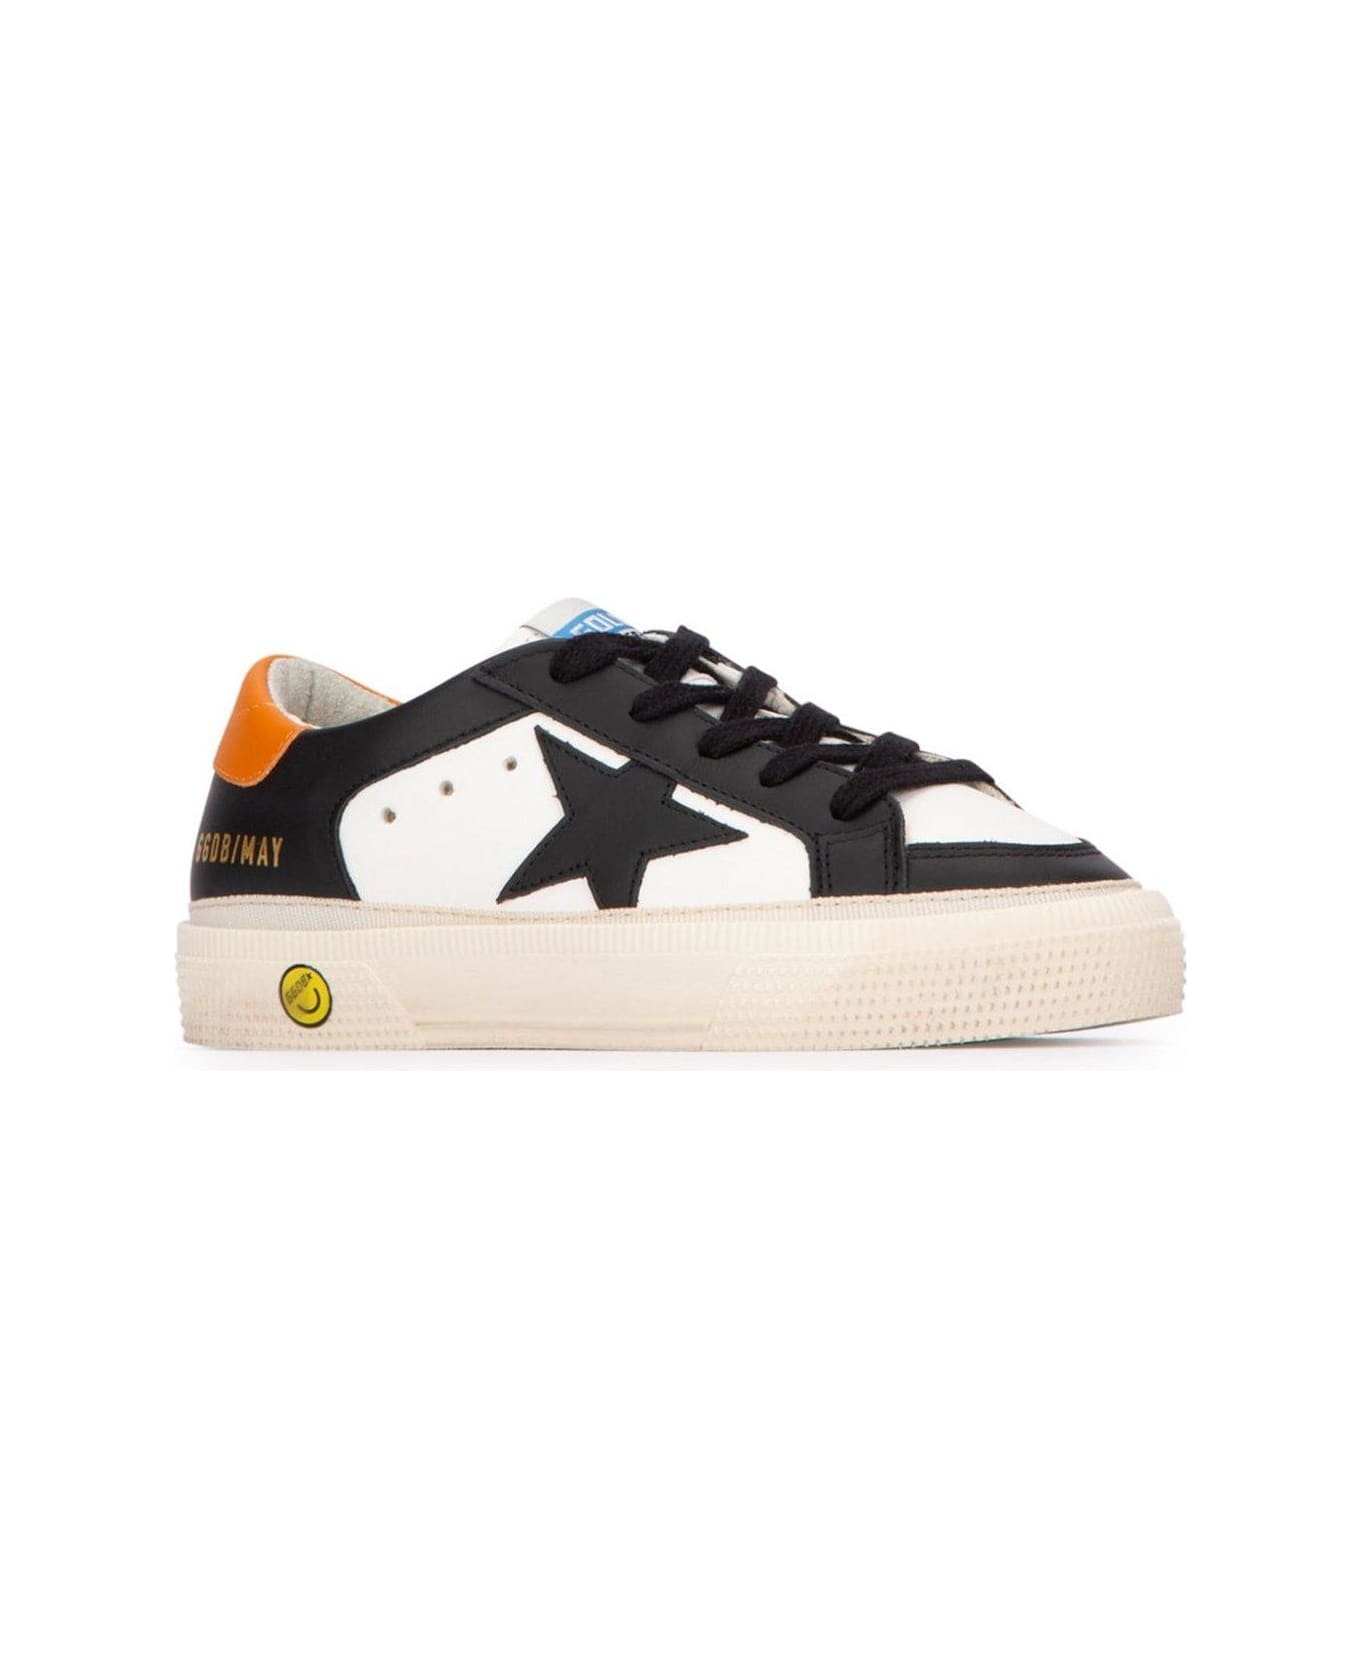 Golden Goose May Star Lace-up Sneakers - White/Black/Orange